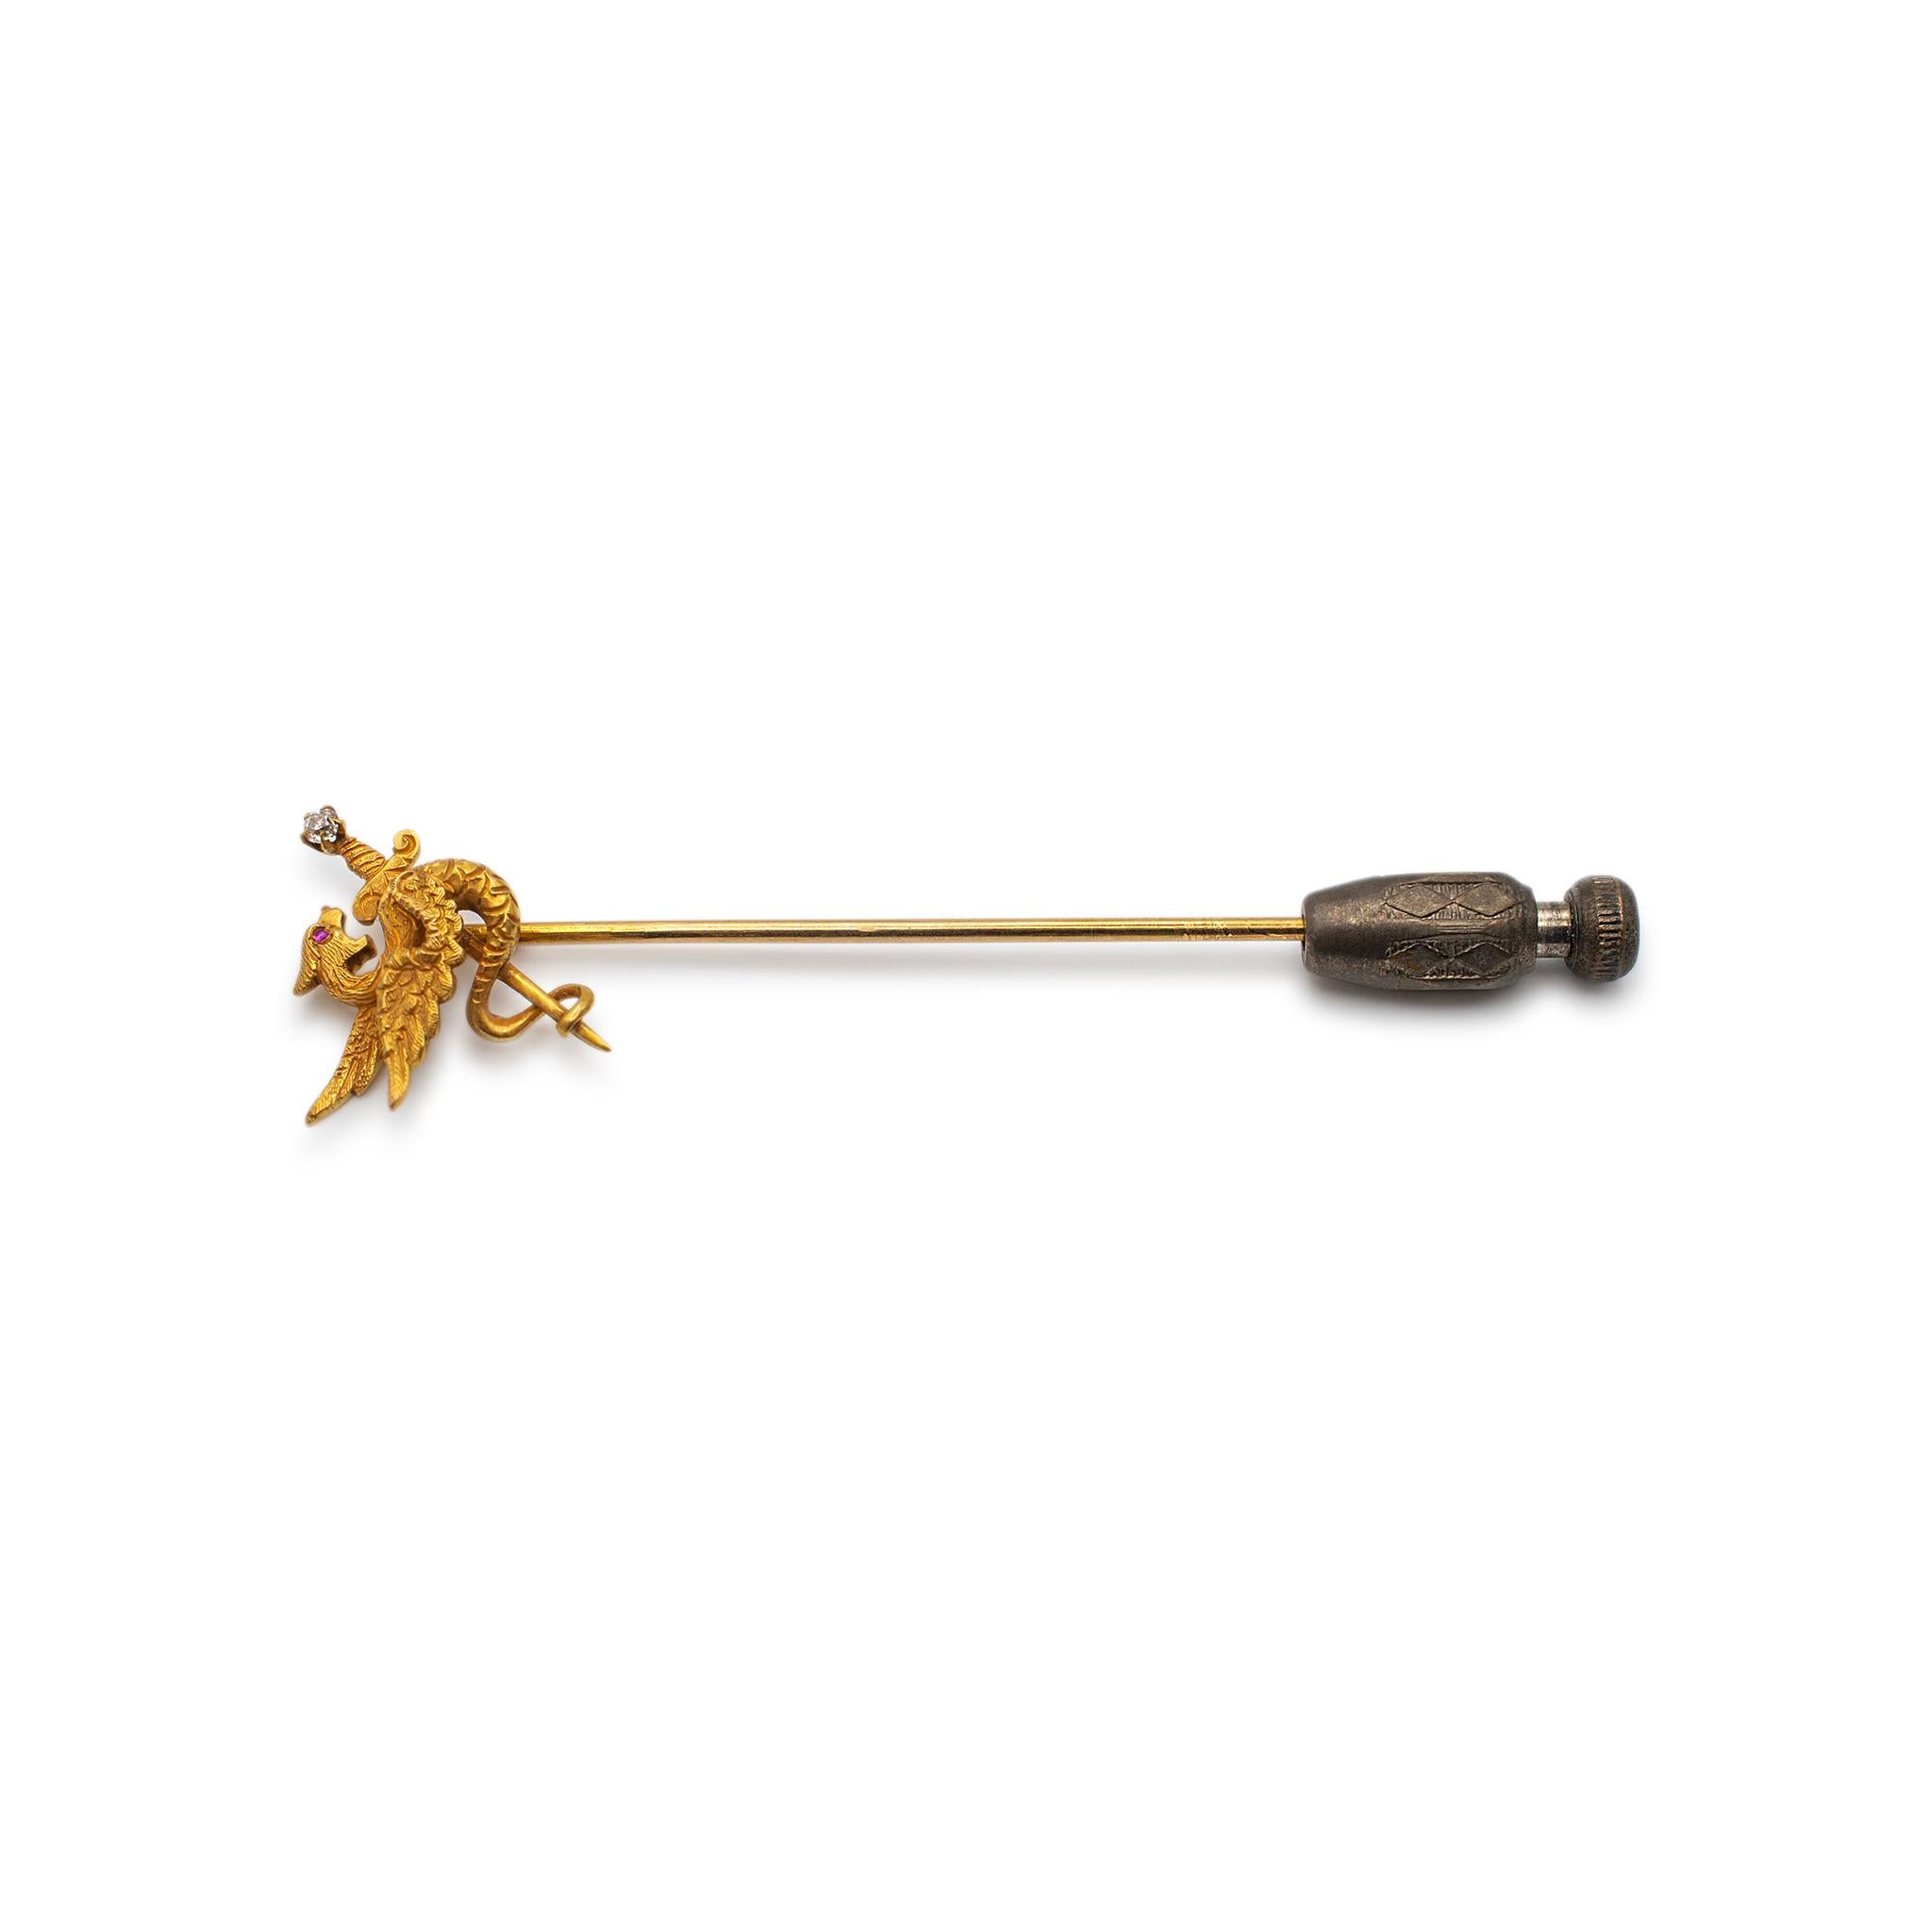 Gender: Unisex

Metal Type: 14K Yellow Gold

Length: 2.25 Inches

Width: 14.80 mm

Weight: 1.71 grams

14K yellow gold diamond and pink sapphire antique stick pin. Engraved with 